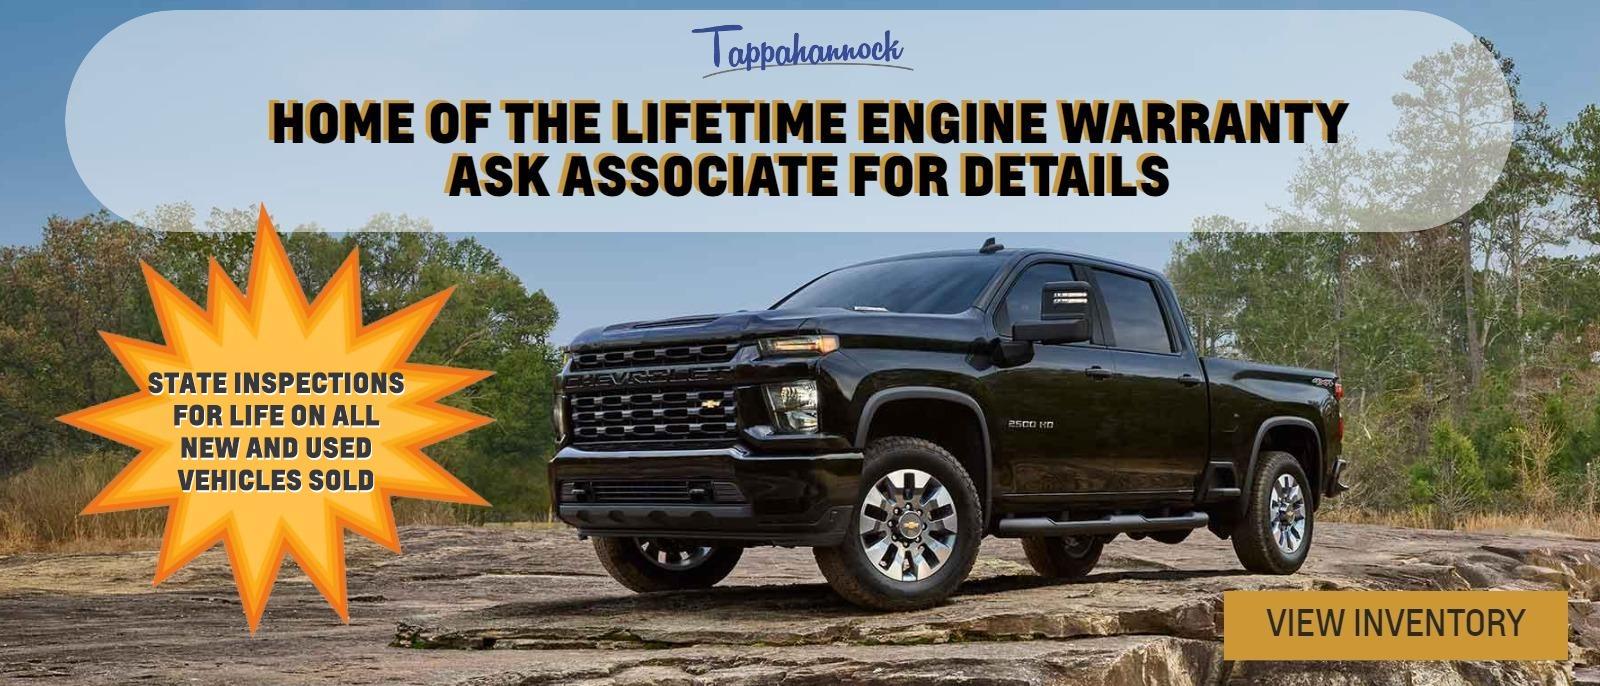 Home of the Lifetime Engine Warranty
Ask associate for details